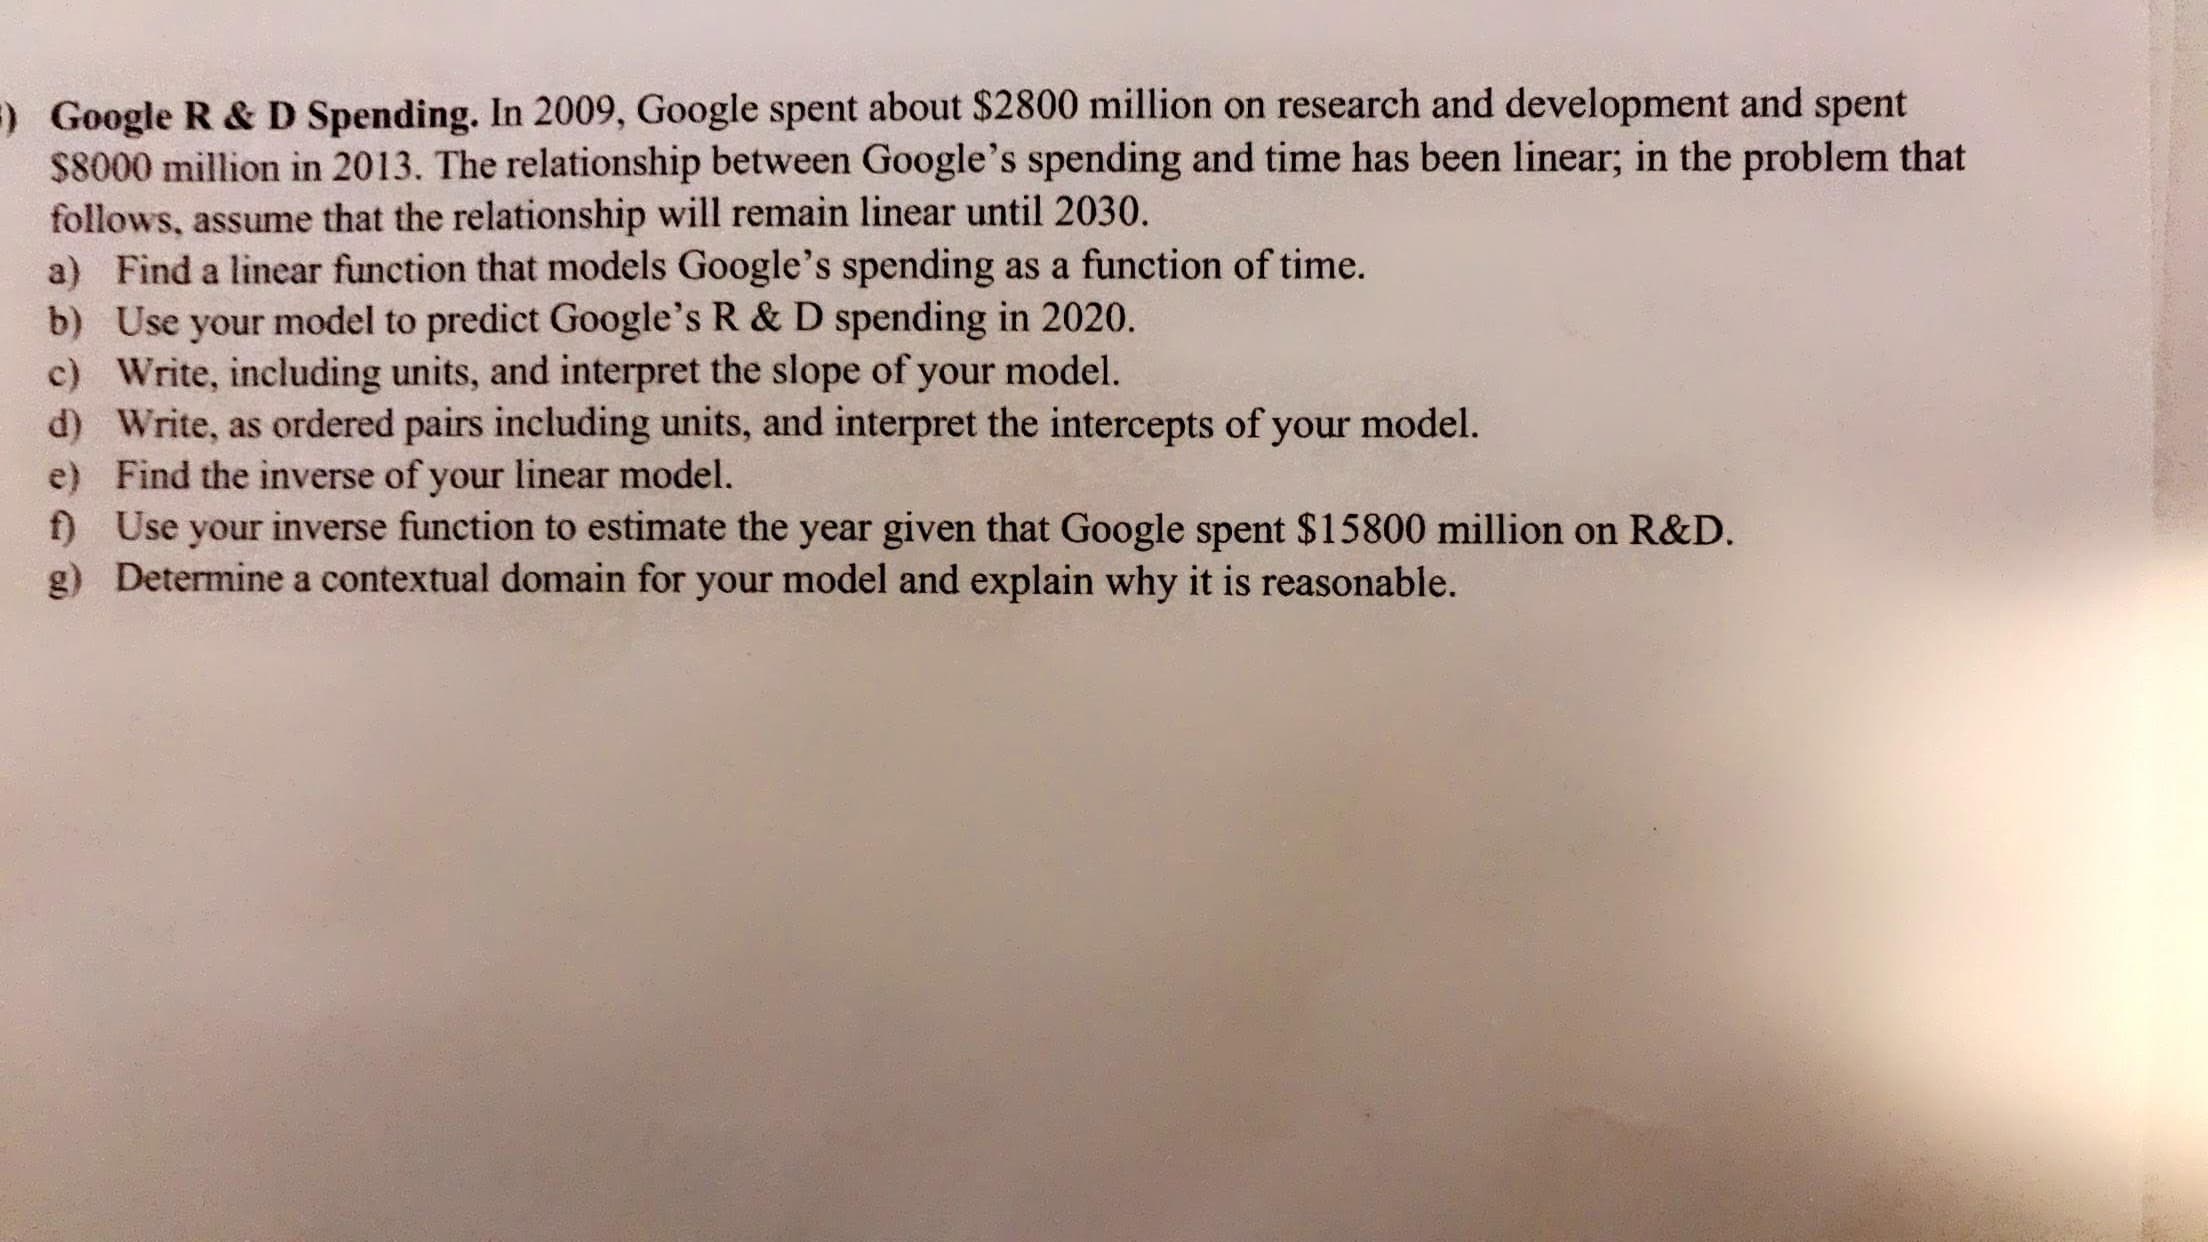 Google R & D Spending. In 2009, Google spent about $2800 million on research and development and spent
$8000 million in 2013. The relationship between Google's spending and time has been linear; in the problem that
follows, assume that the relationship will remain linear until 2030.
a) Find a linear function that models Google's spending as a function of time.
b) Use your model to predict Google's R & D spending in 2020.
c) Write, including units, and interpret the slope of your model.
